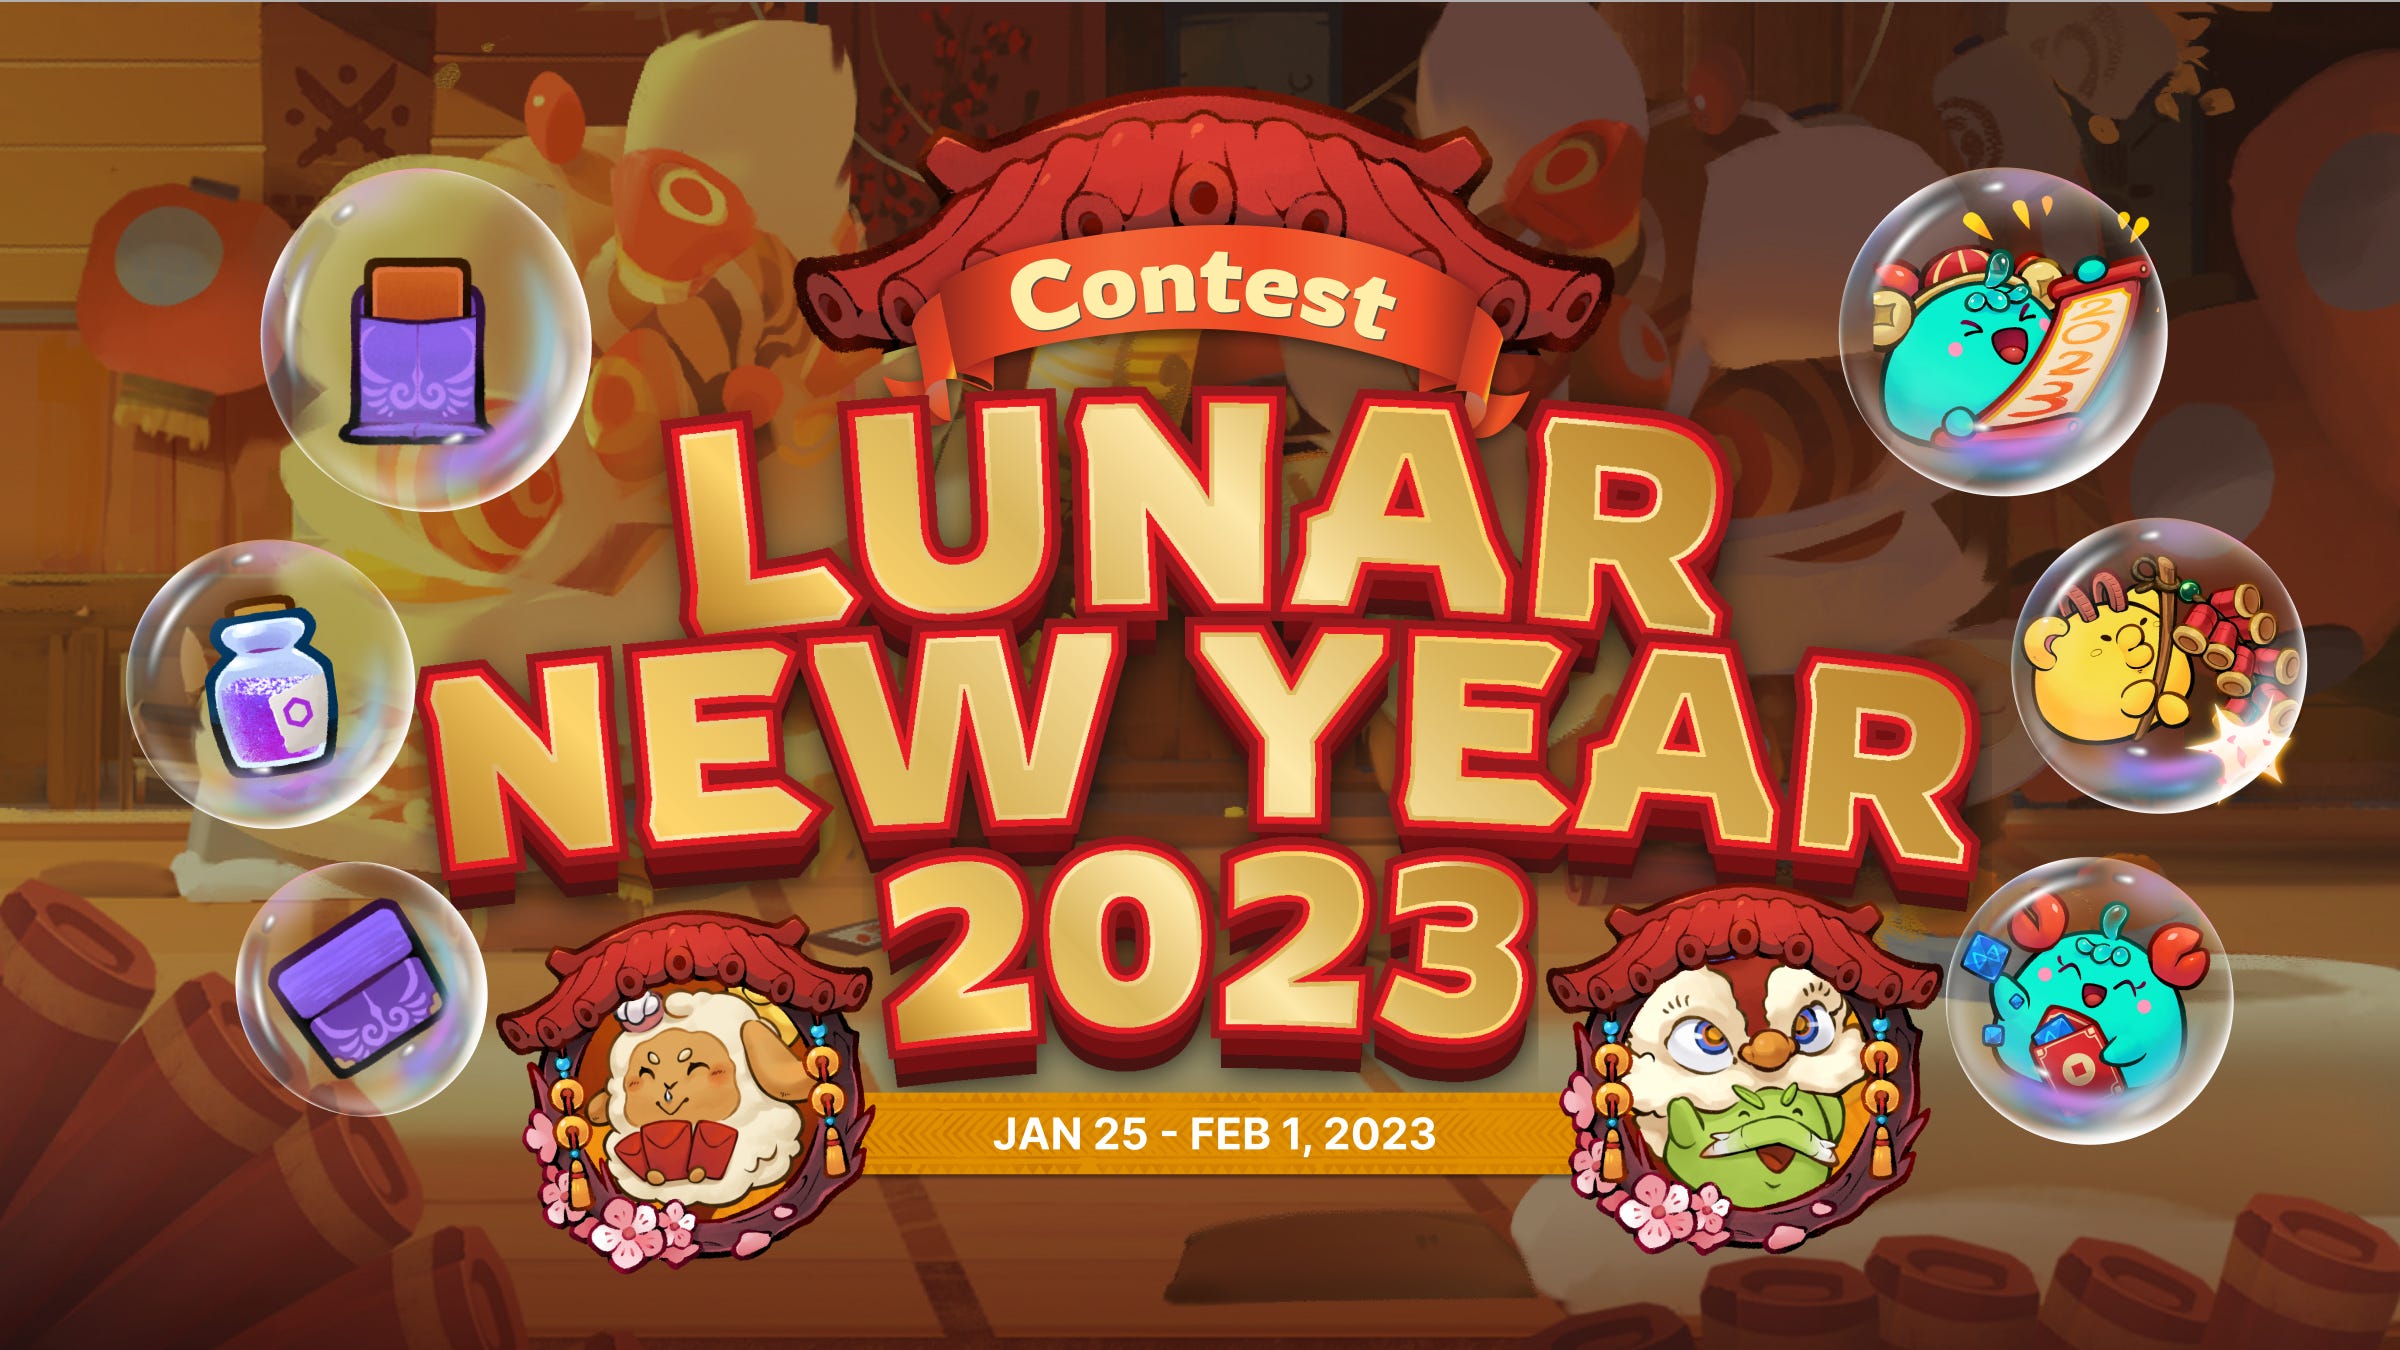 BoomBit on X: Happy Lunar New Year! There is a new Year Of The Tiger event  in Car Driving School Simulator, so make sure you don't miss it!   #lunarnewyear #chinesenewyear #cardrivingschool #